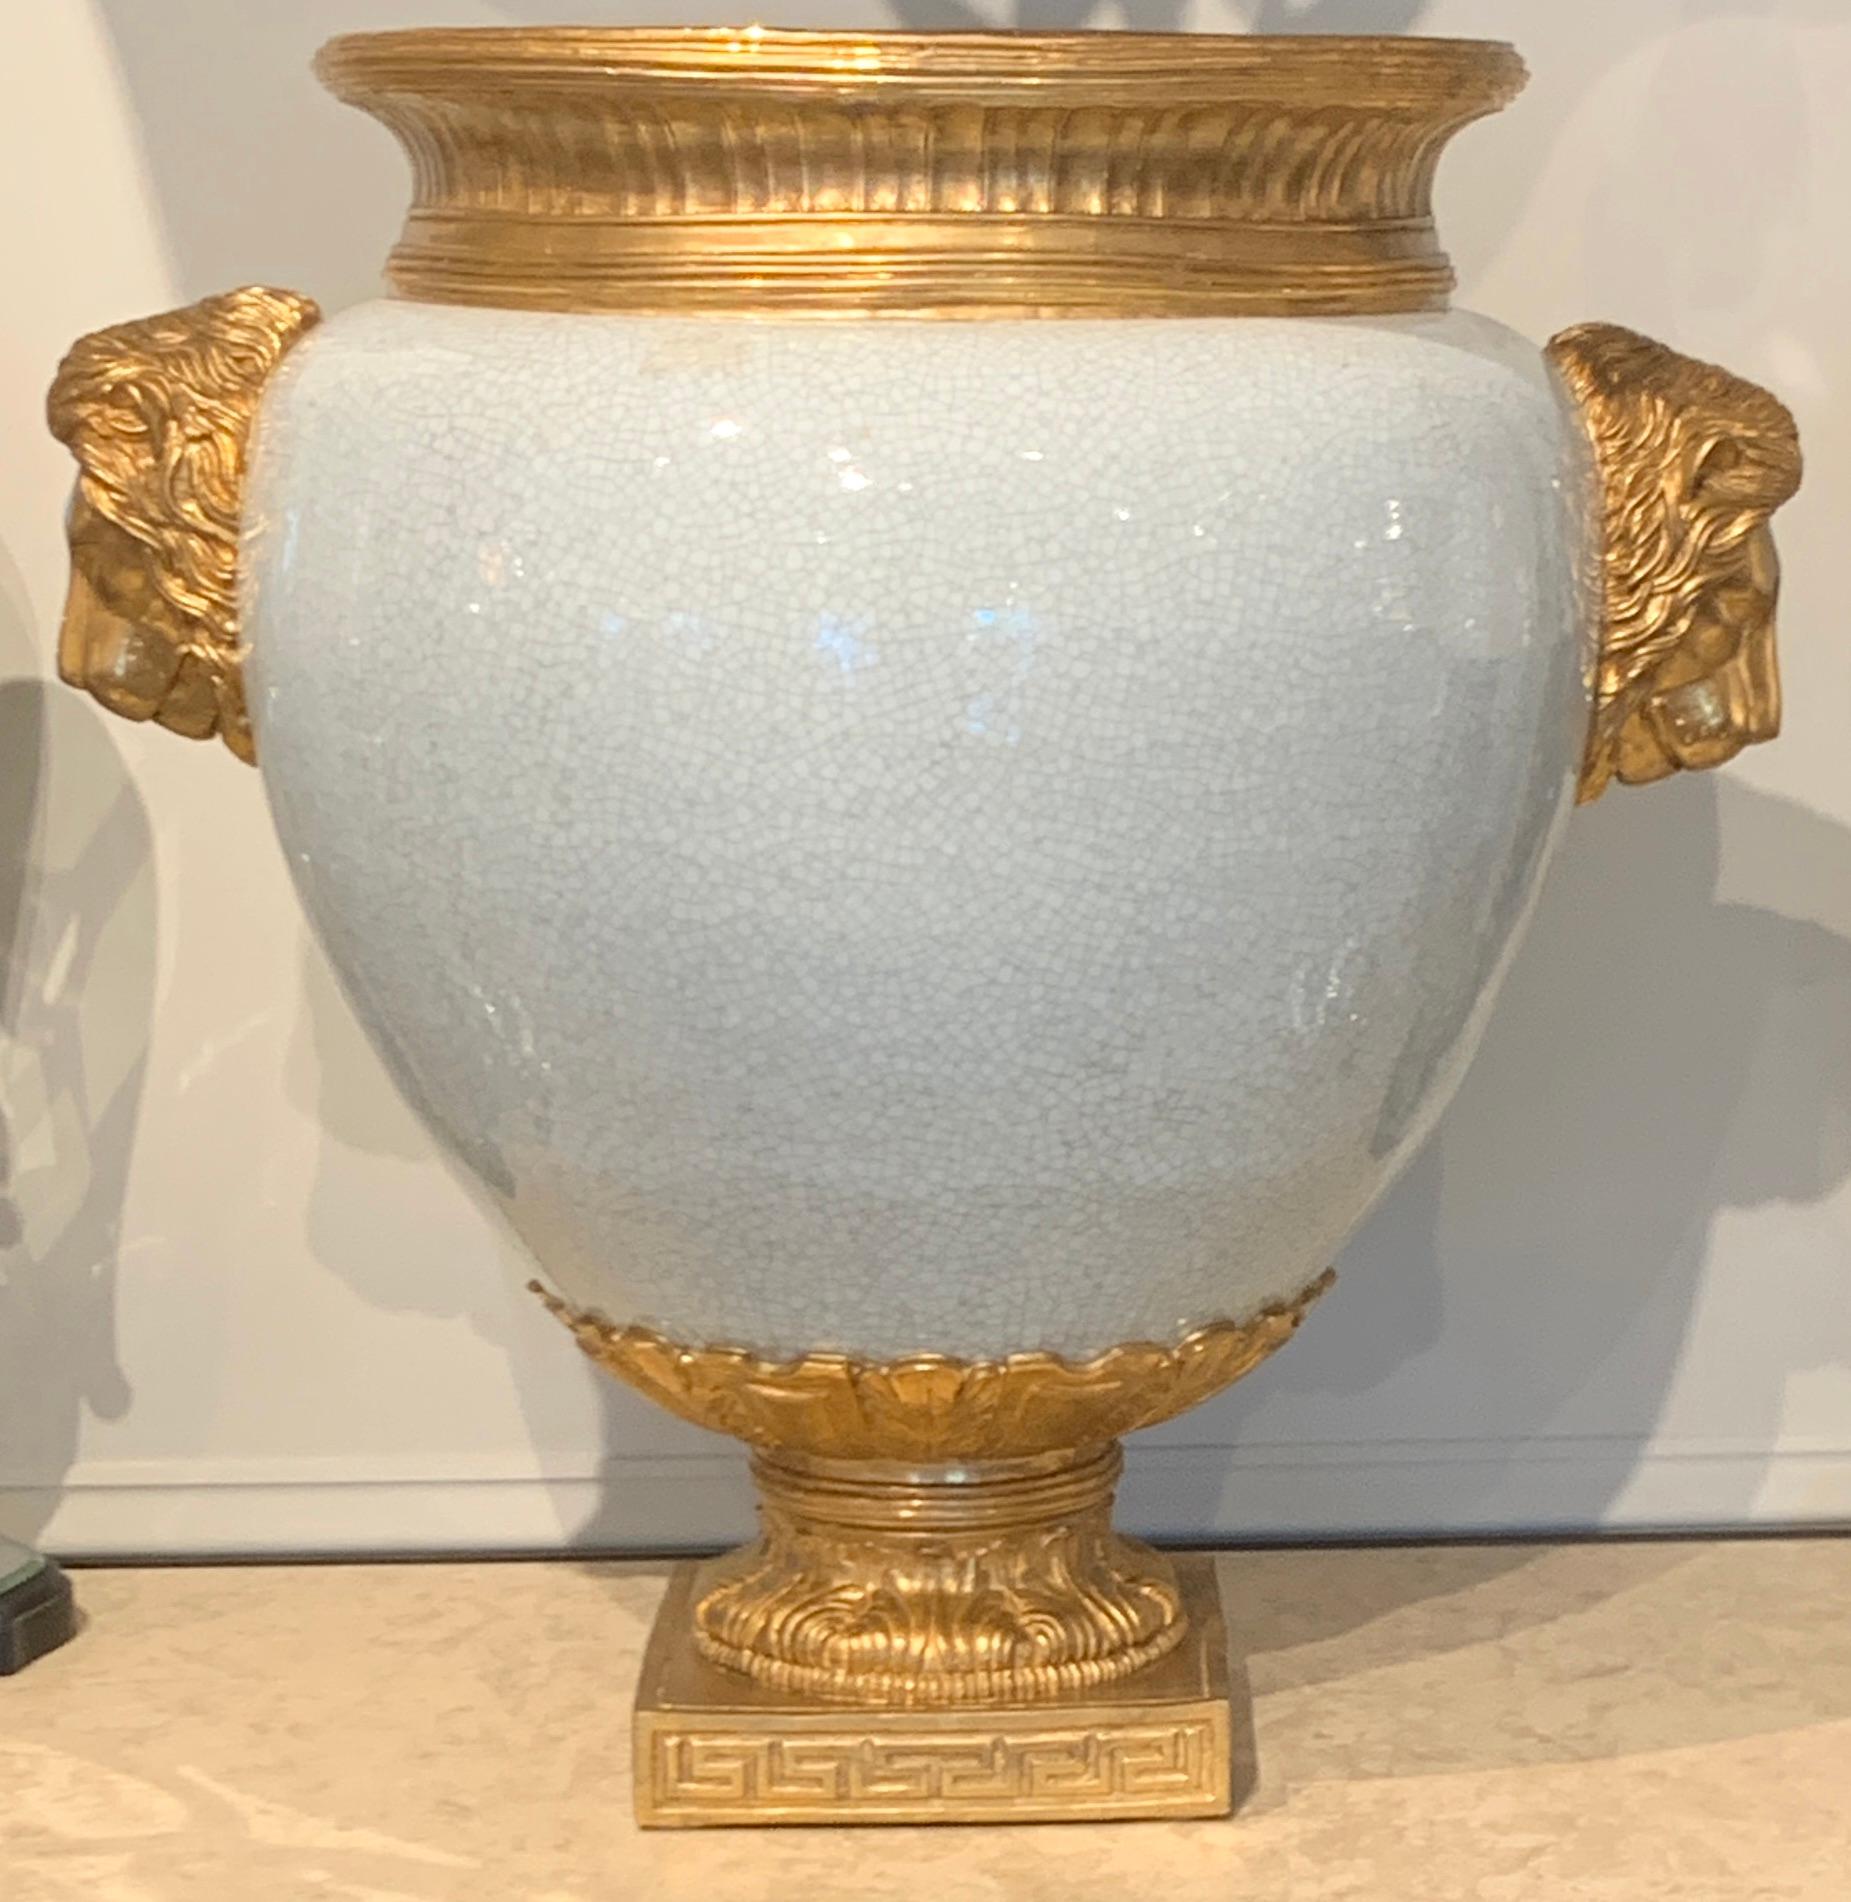 Chinese crackle glaze and ormolu lion motif urn, large beautiful random Chinese crackle vase, with French ormolu mounts, with a 15